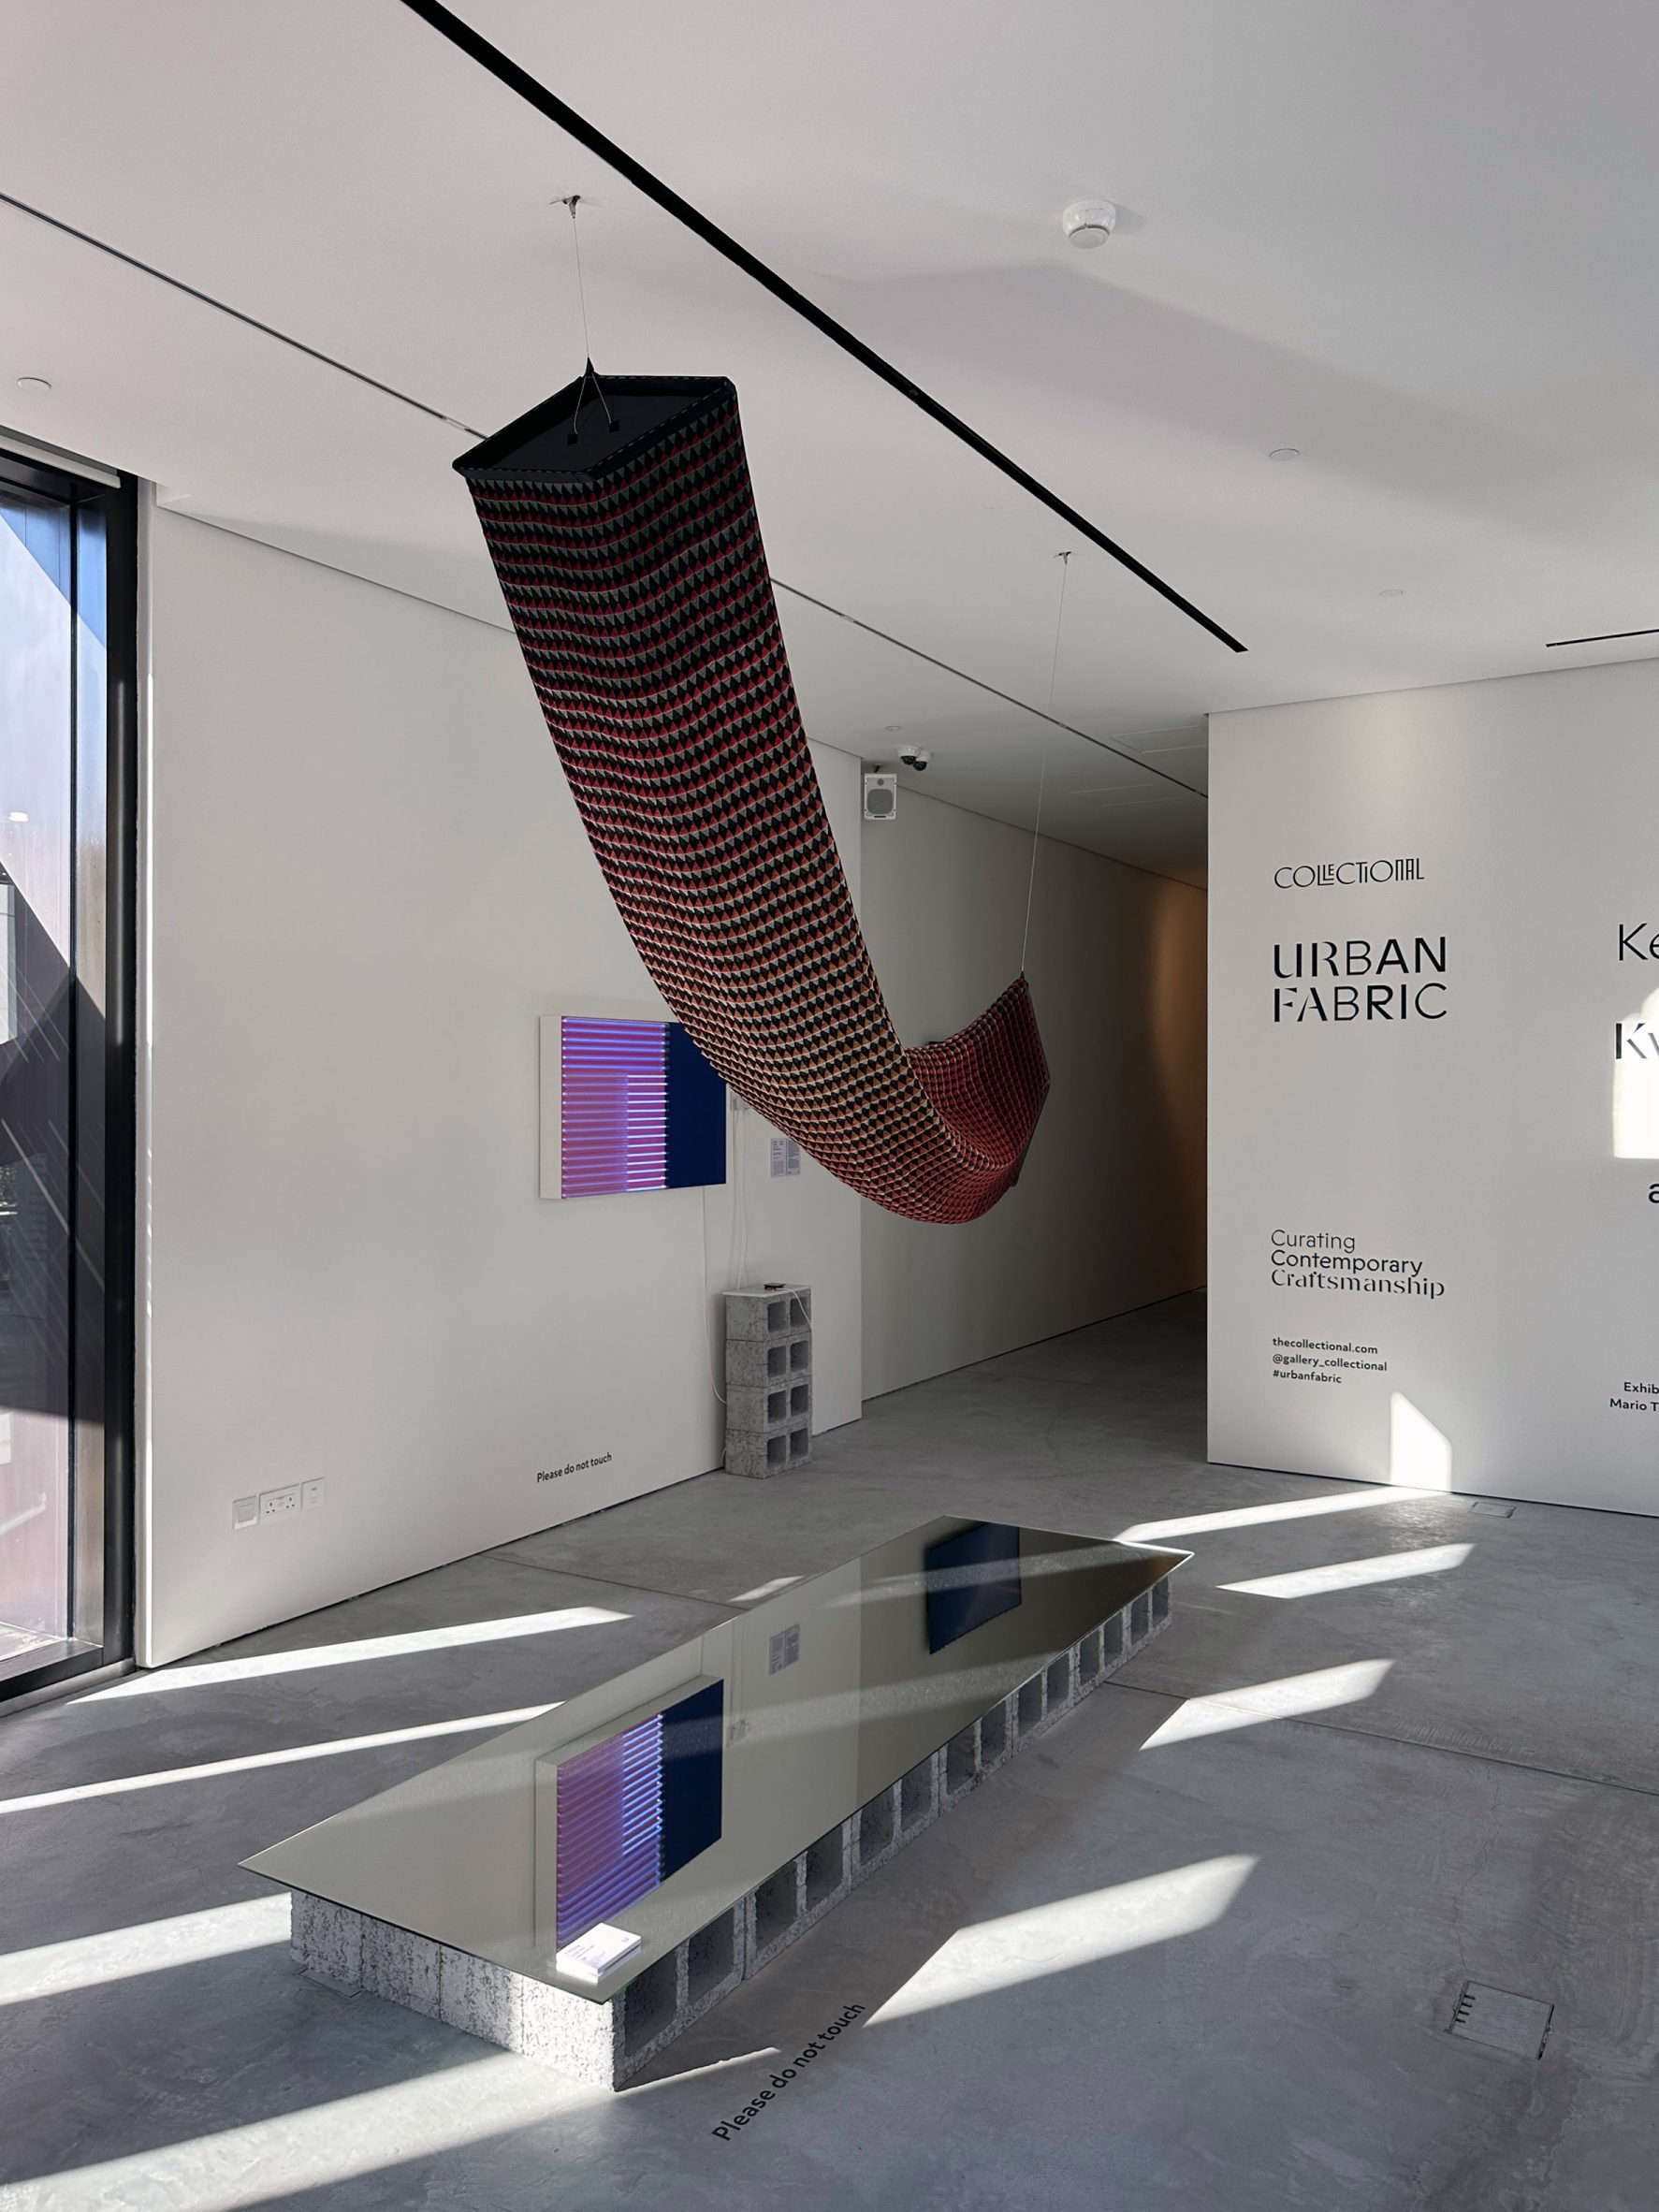 Urban Fabric furniture exhibition at Gallery Collectional in Dubai